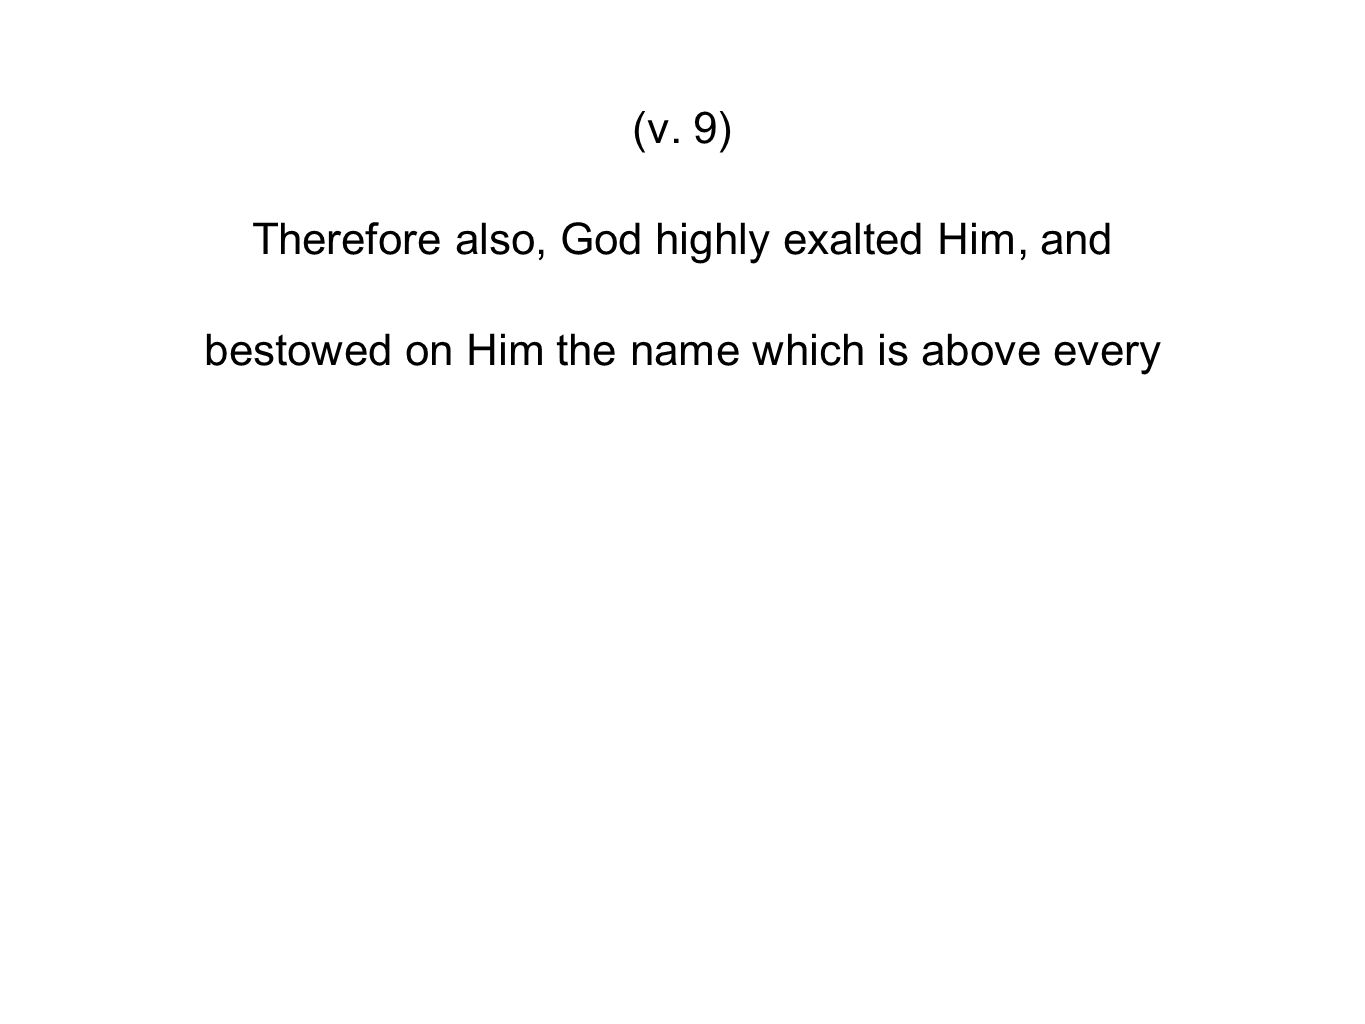 (v. 9) Therefore also, God highly exalted Him, and bestowed on Him the name which is above every